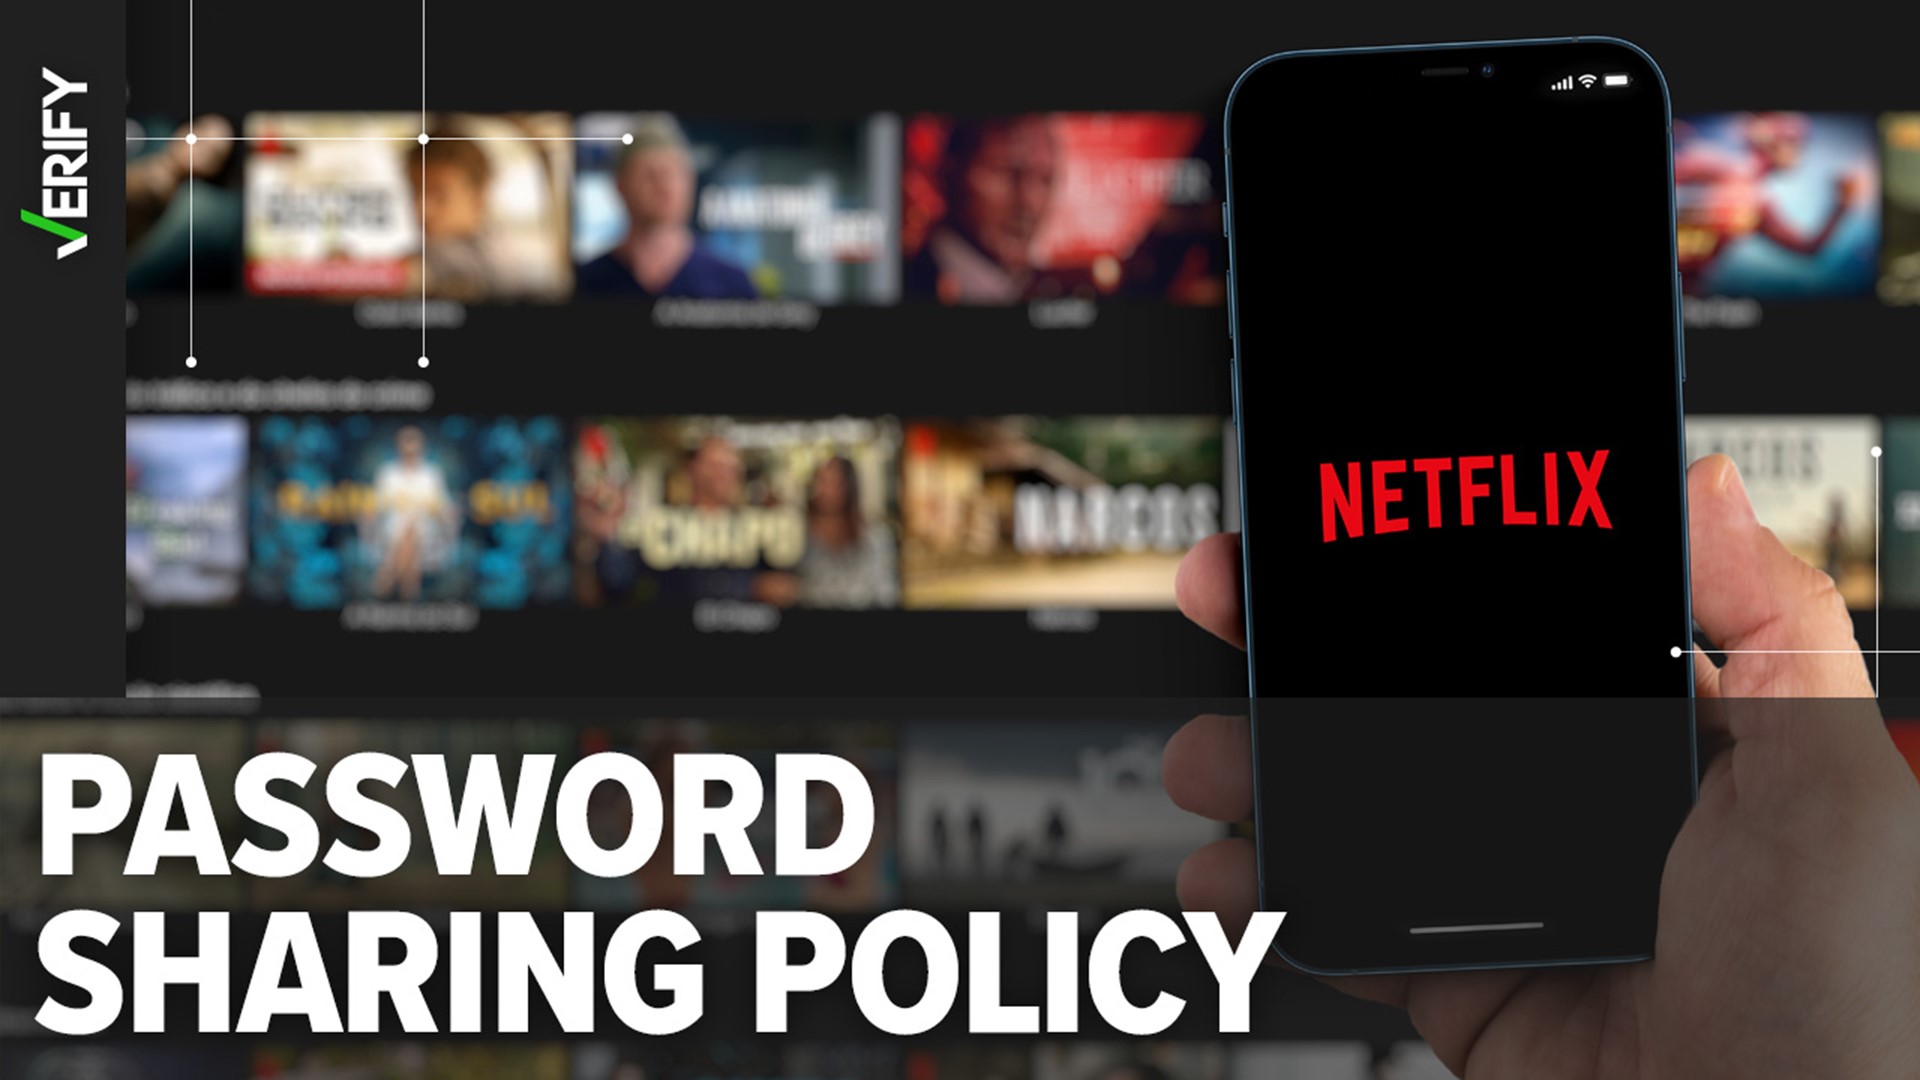 Netflix is testing a feature that charges a fee for password sharing, but it’s only happening in Chile, Costa Rica, and Peru — not in the United States.